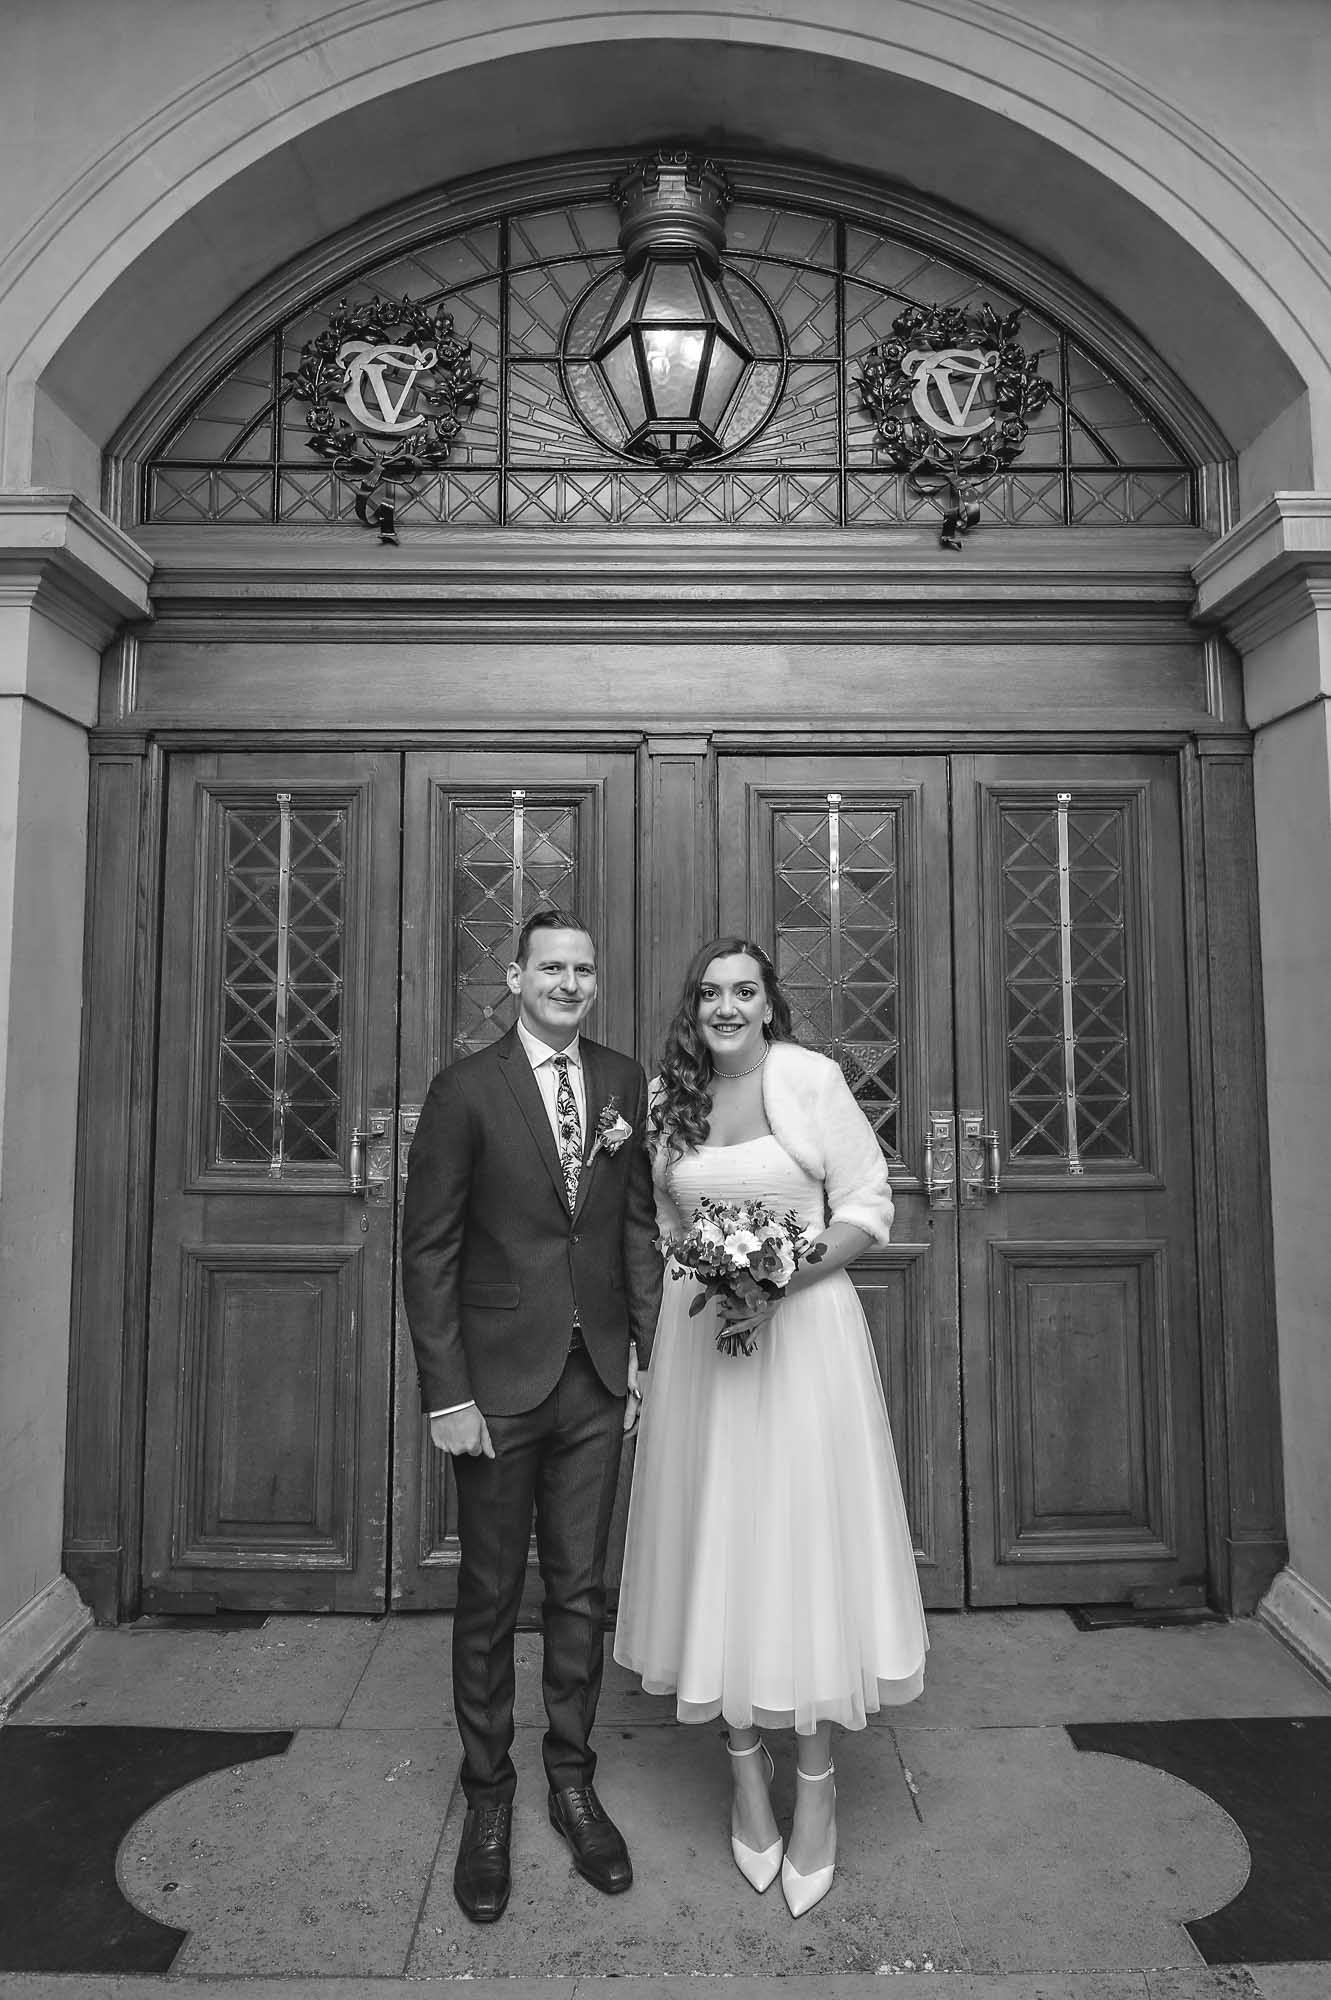 Couple standing inside doors of Cardiff City Hall after arriving for their wedding ceremony